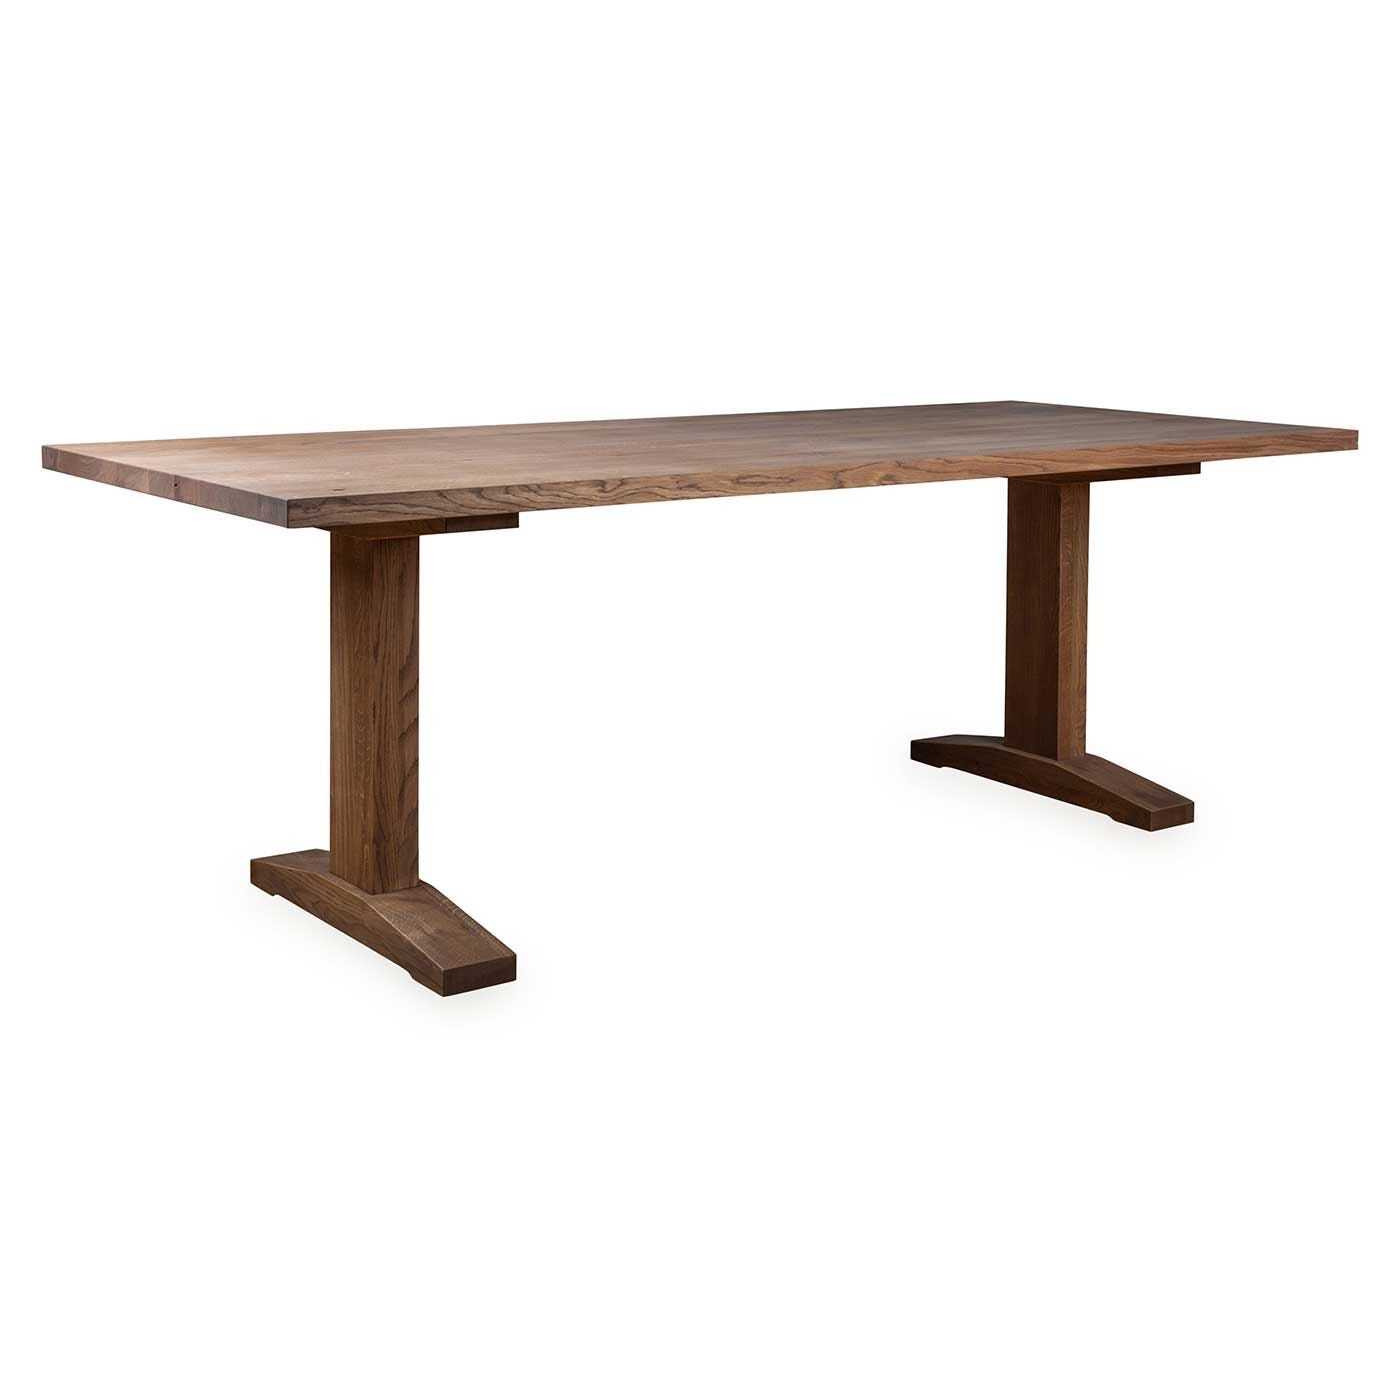 Heal's Lisbon Table 160x100cm Natural Oiled Oak Chamfered Edge Not Filled